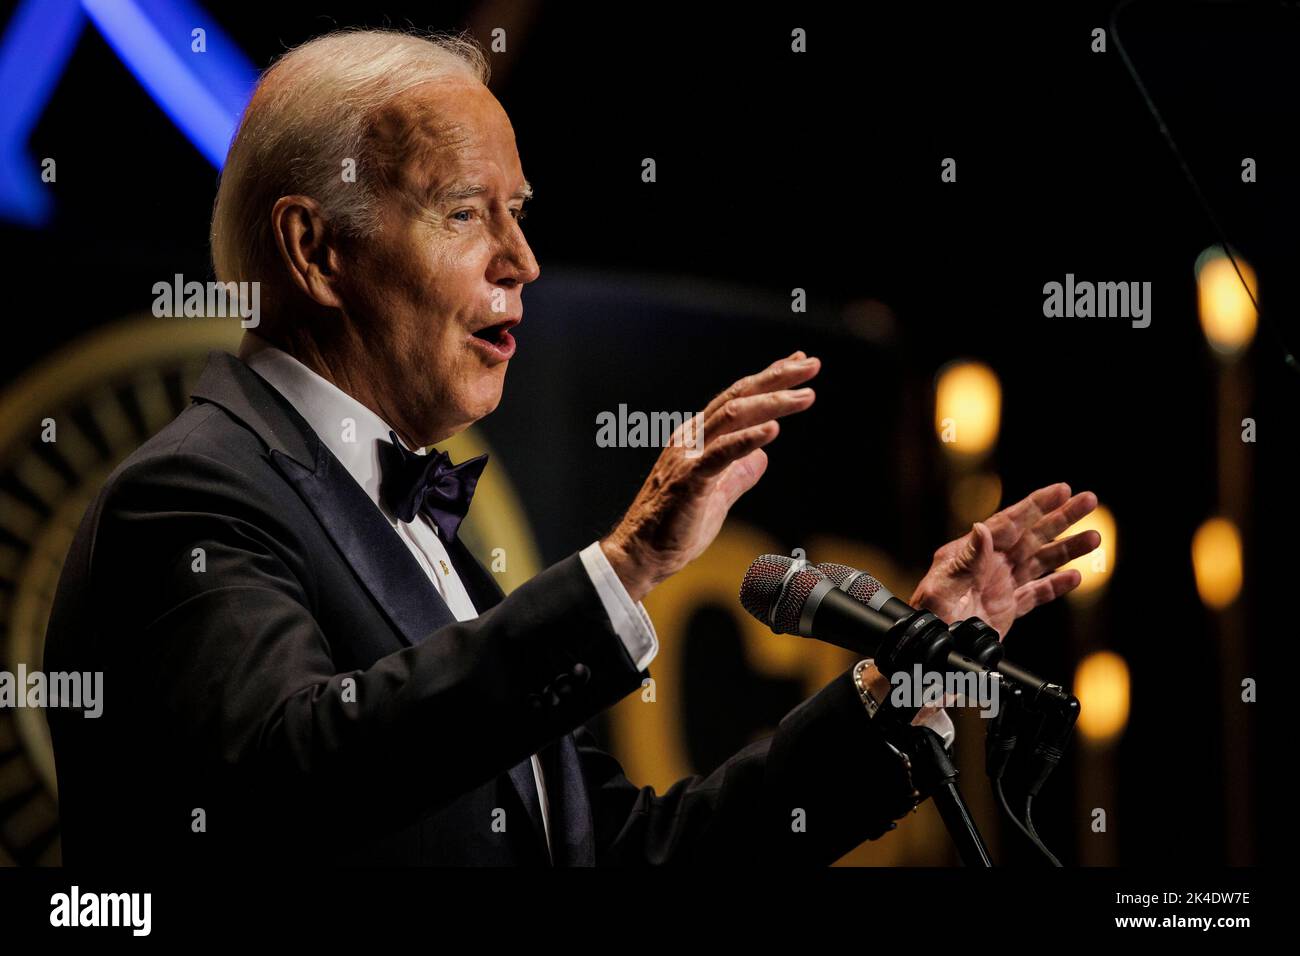 Washington, DC, USA. 1st Oct, 2022. United States President Joe Biden speaks at the Phoenix Awards Dinner in Washington, DC, US, on Saturday, October 1, 2022. The Biden administration this week was accused in a lawsuit by six Republican-led states of overstepping its authority with a plan to forgive federal student loans. Credit: Samuel Corum/Pool via CNP/dpa/Alamy Live News Stock Photo